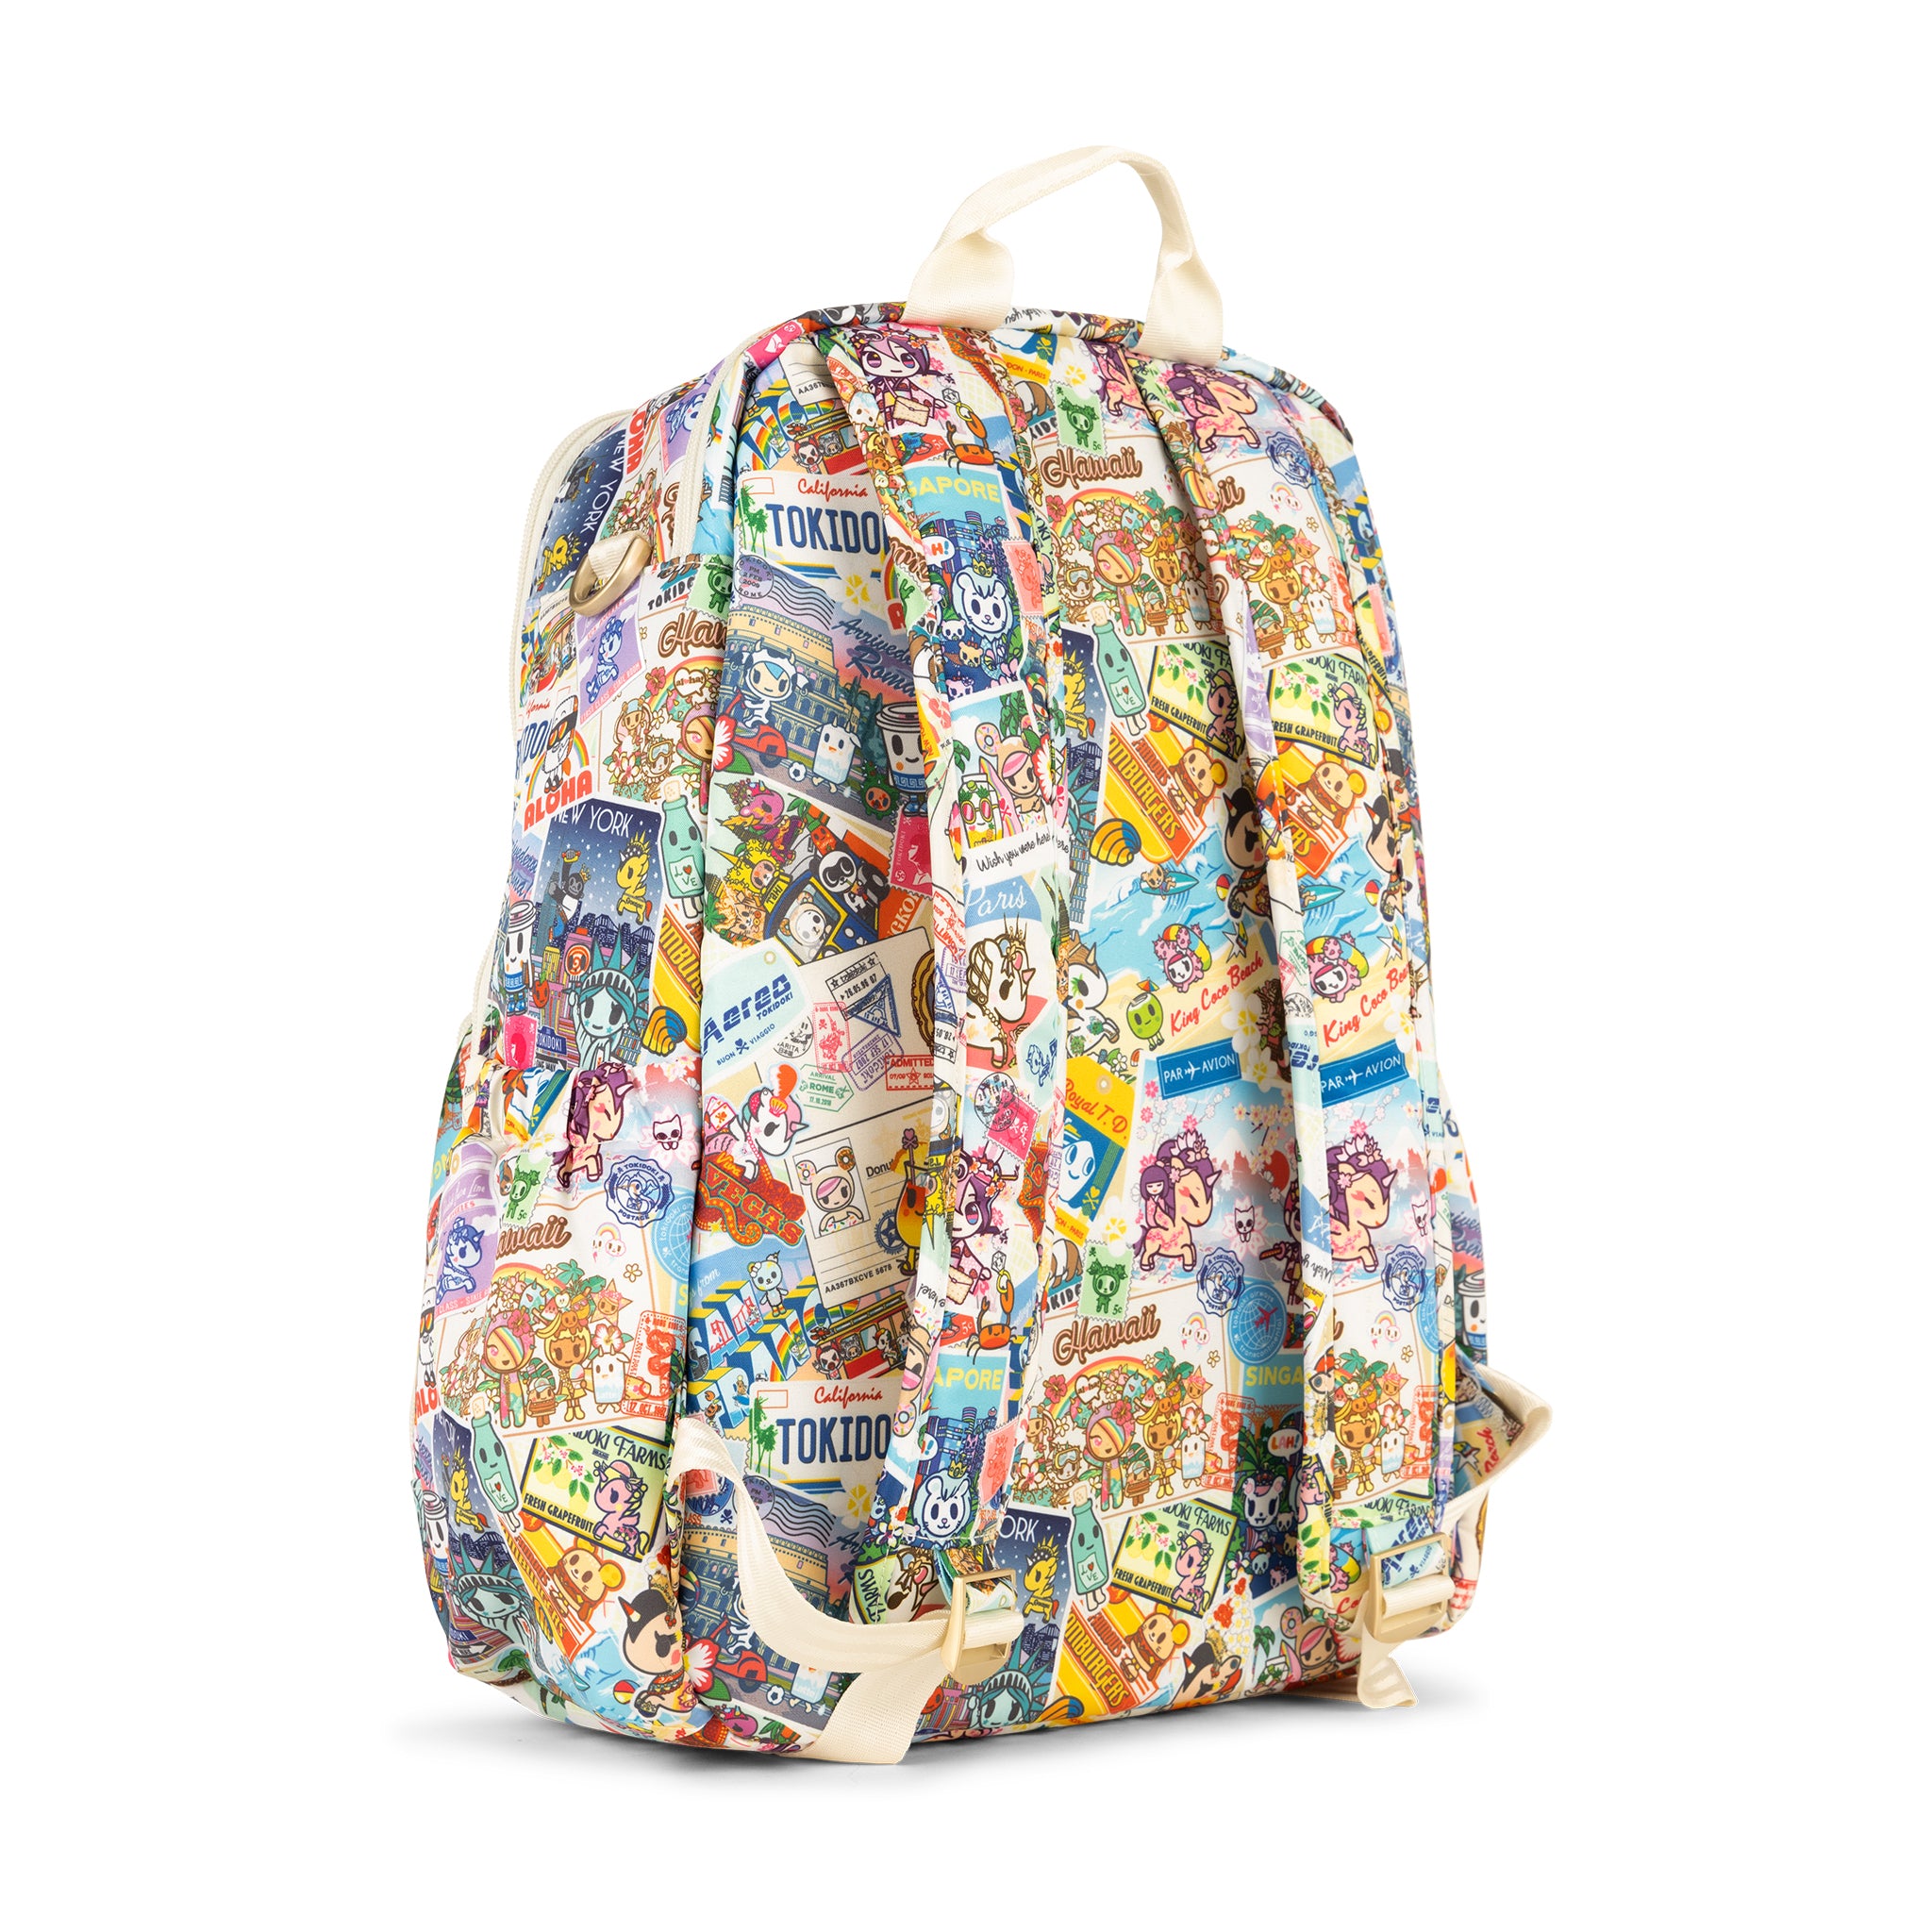 Multicolor Postcards with tokidoki characters traveling Zealous Backpack Back Angle View